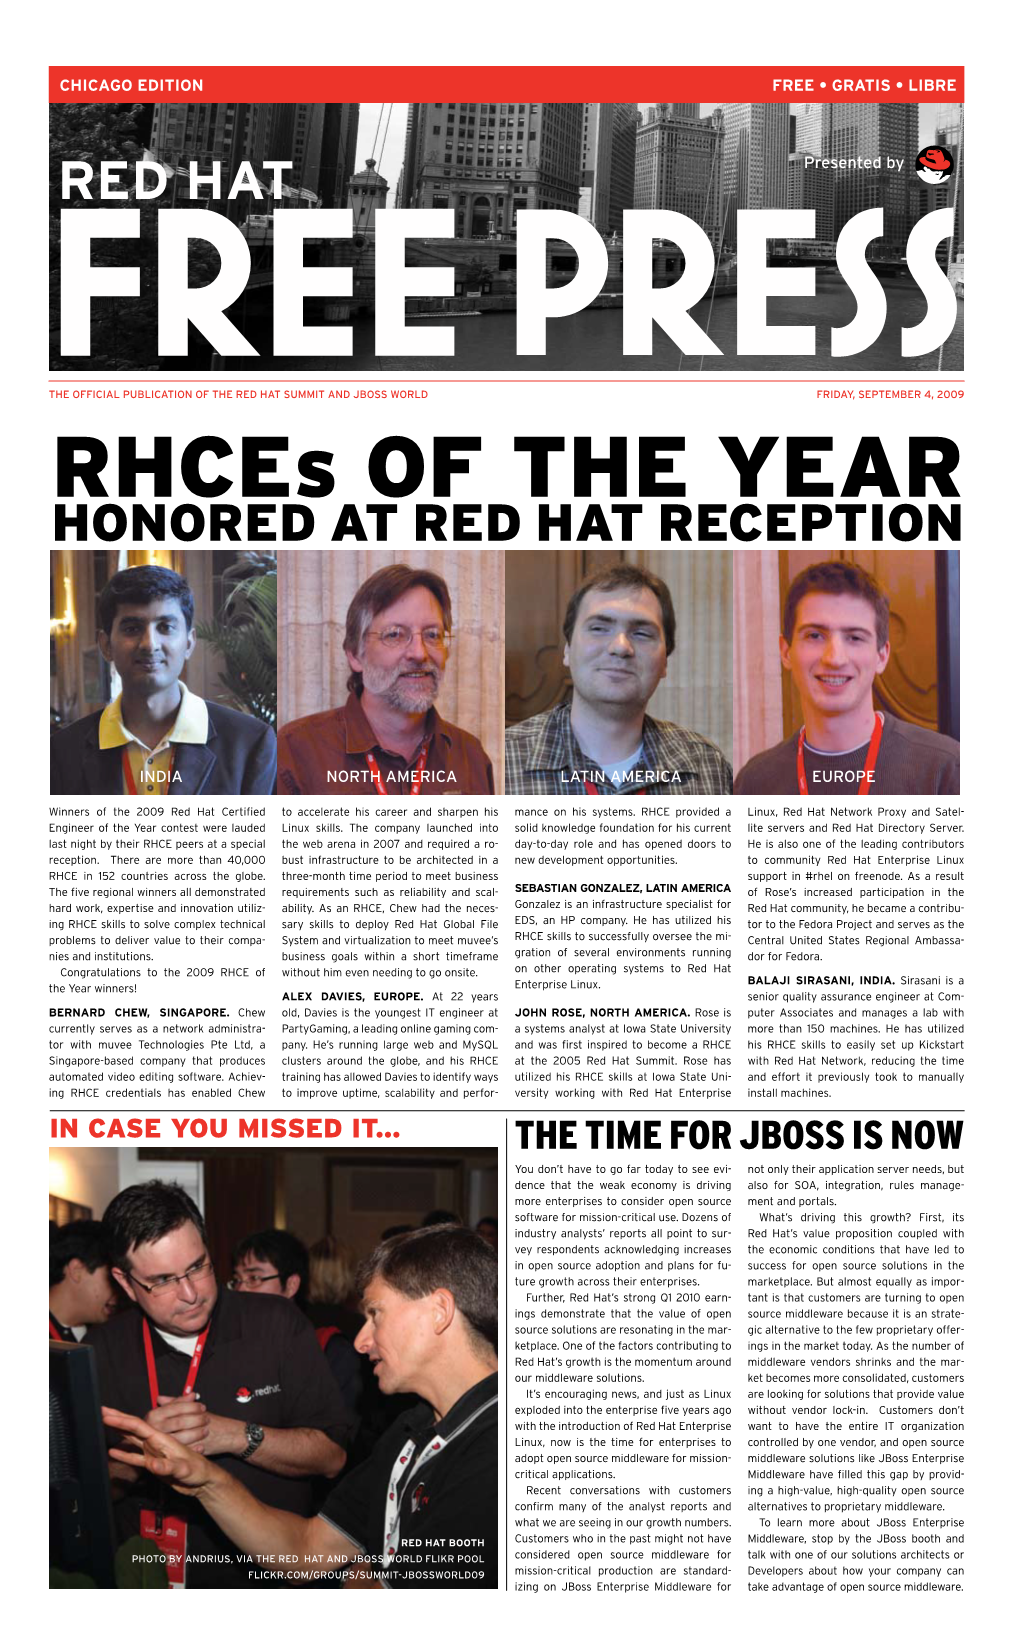 Rhces of the Year Honored at Red Hat Reception